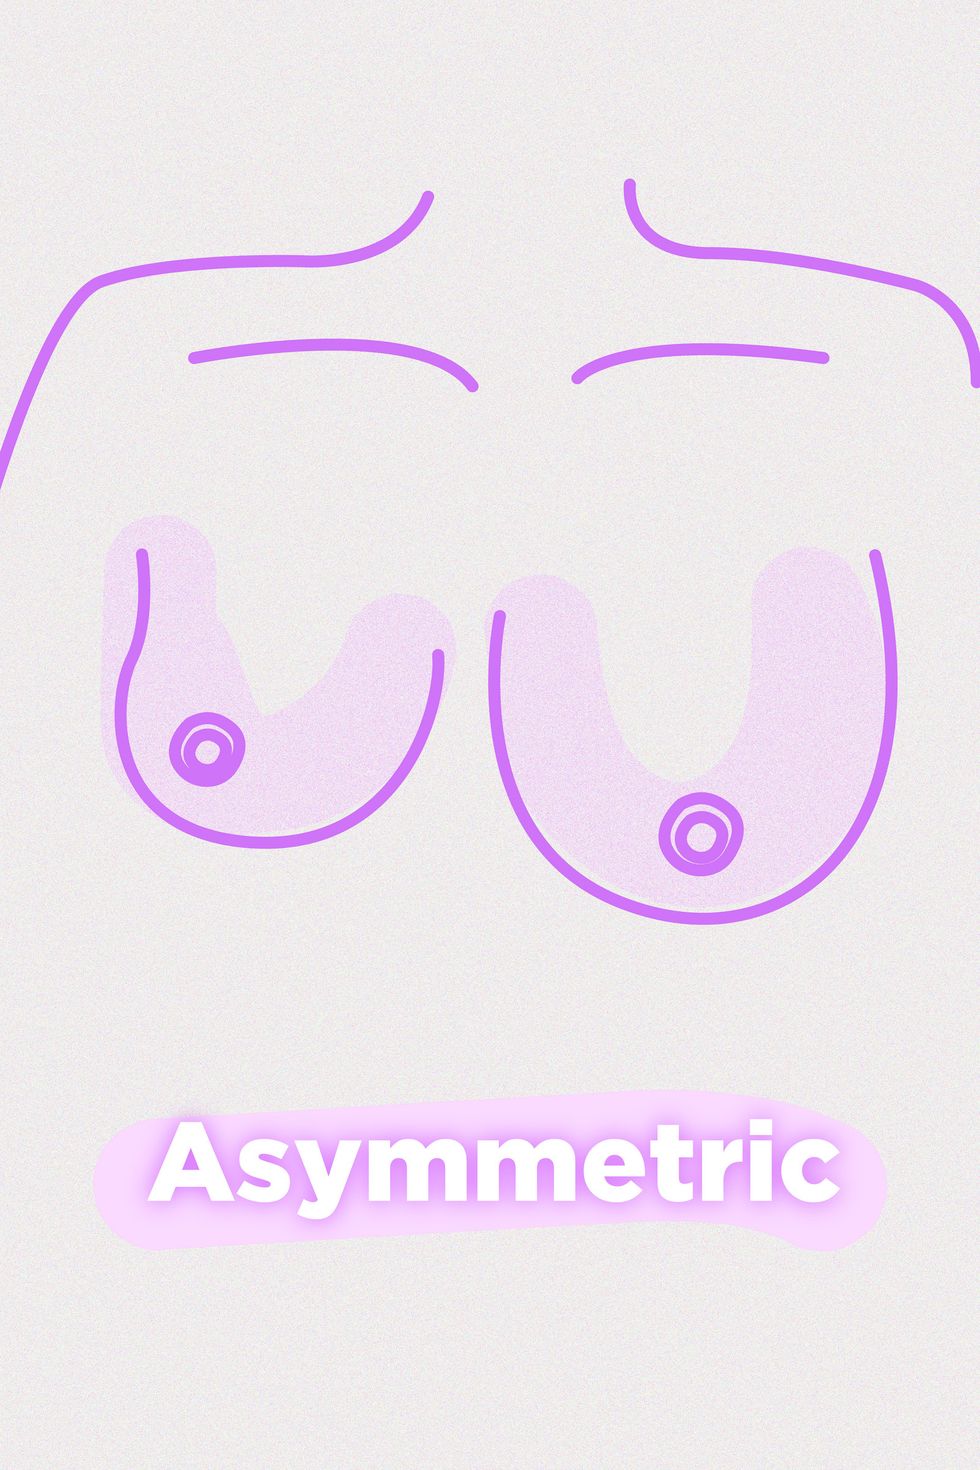 Chest and bust circumference examples